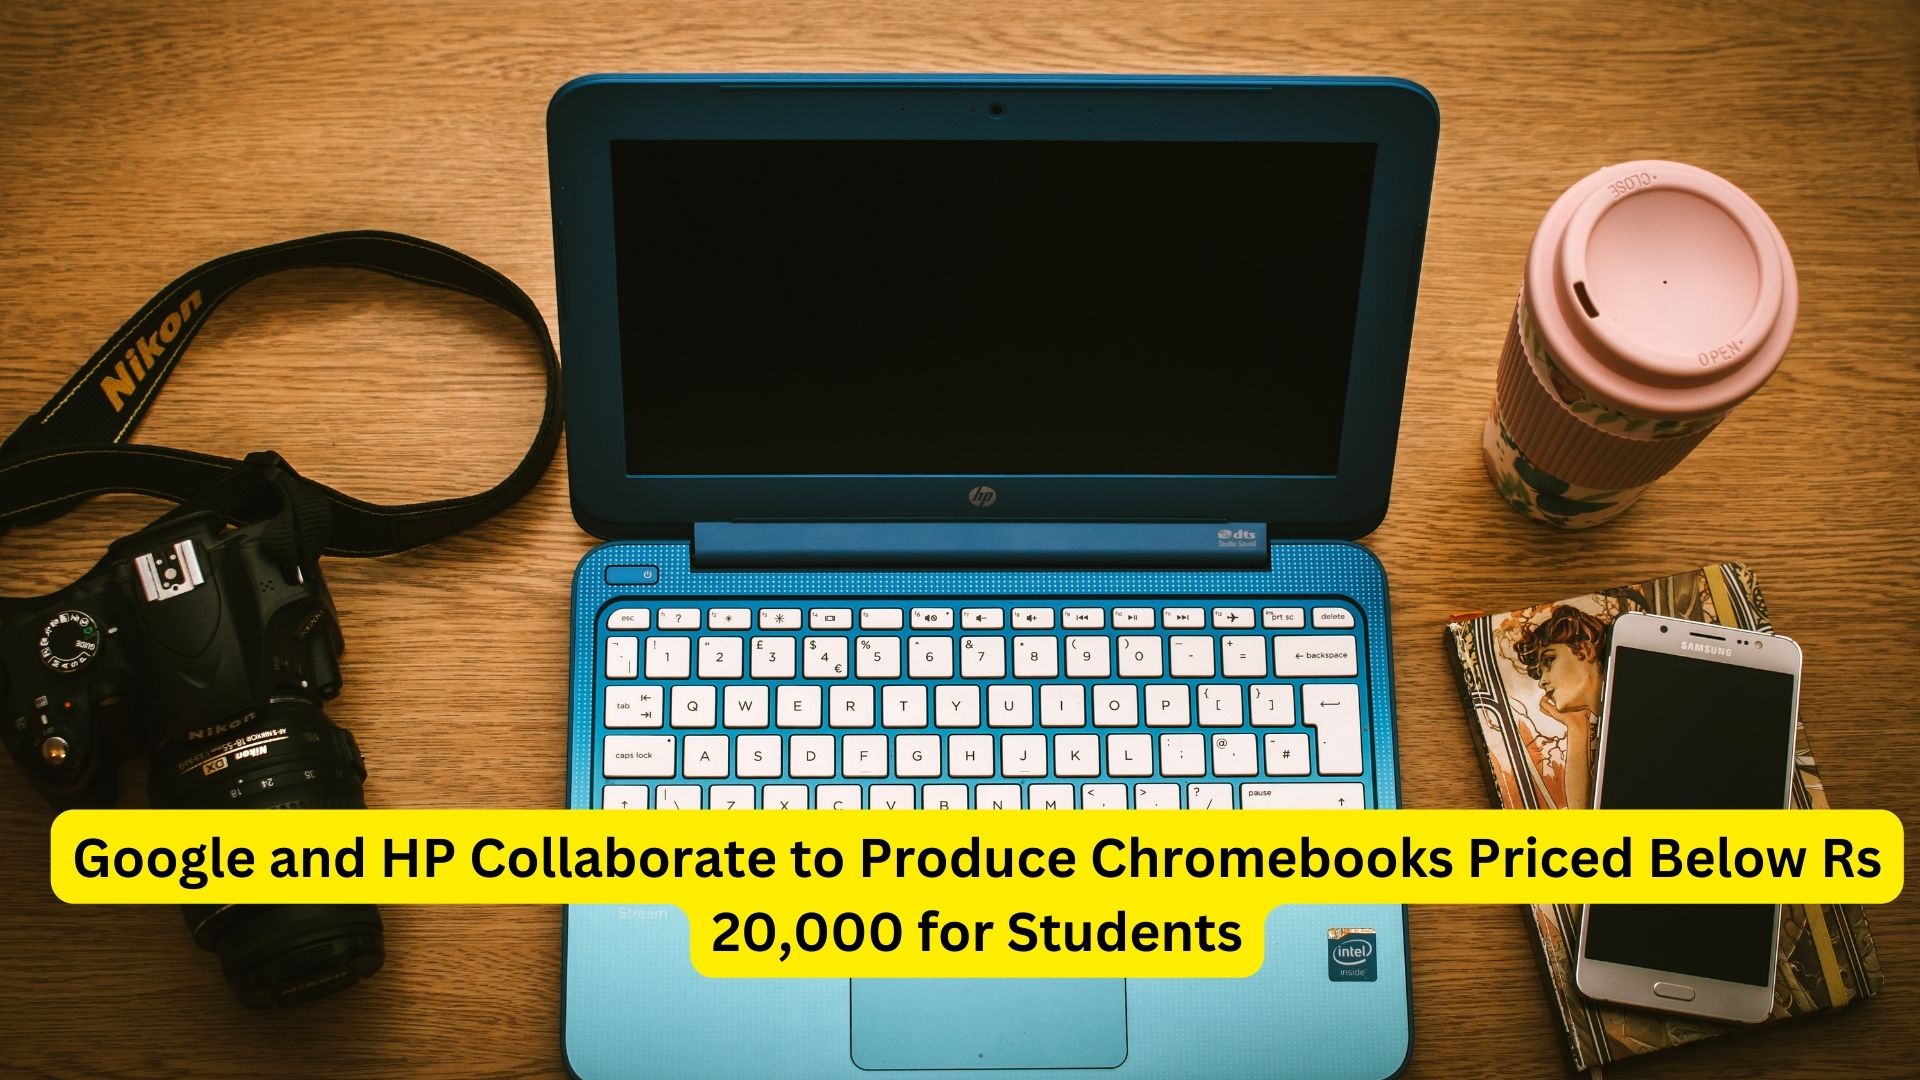 Google and HP Collaborate to Produce Chromebooks Priced Below Rs 20,000 for Students